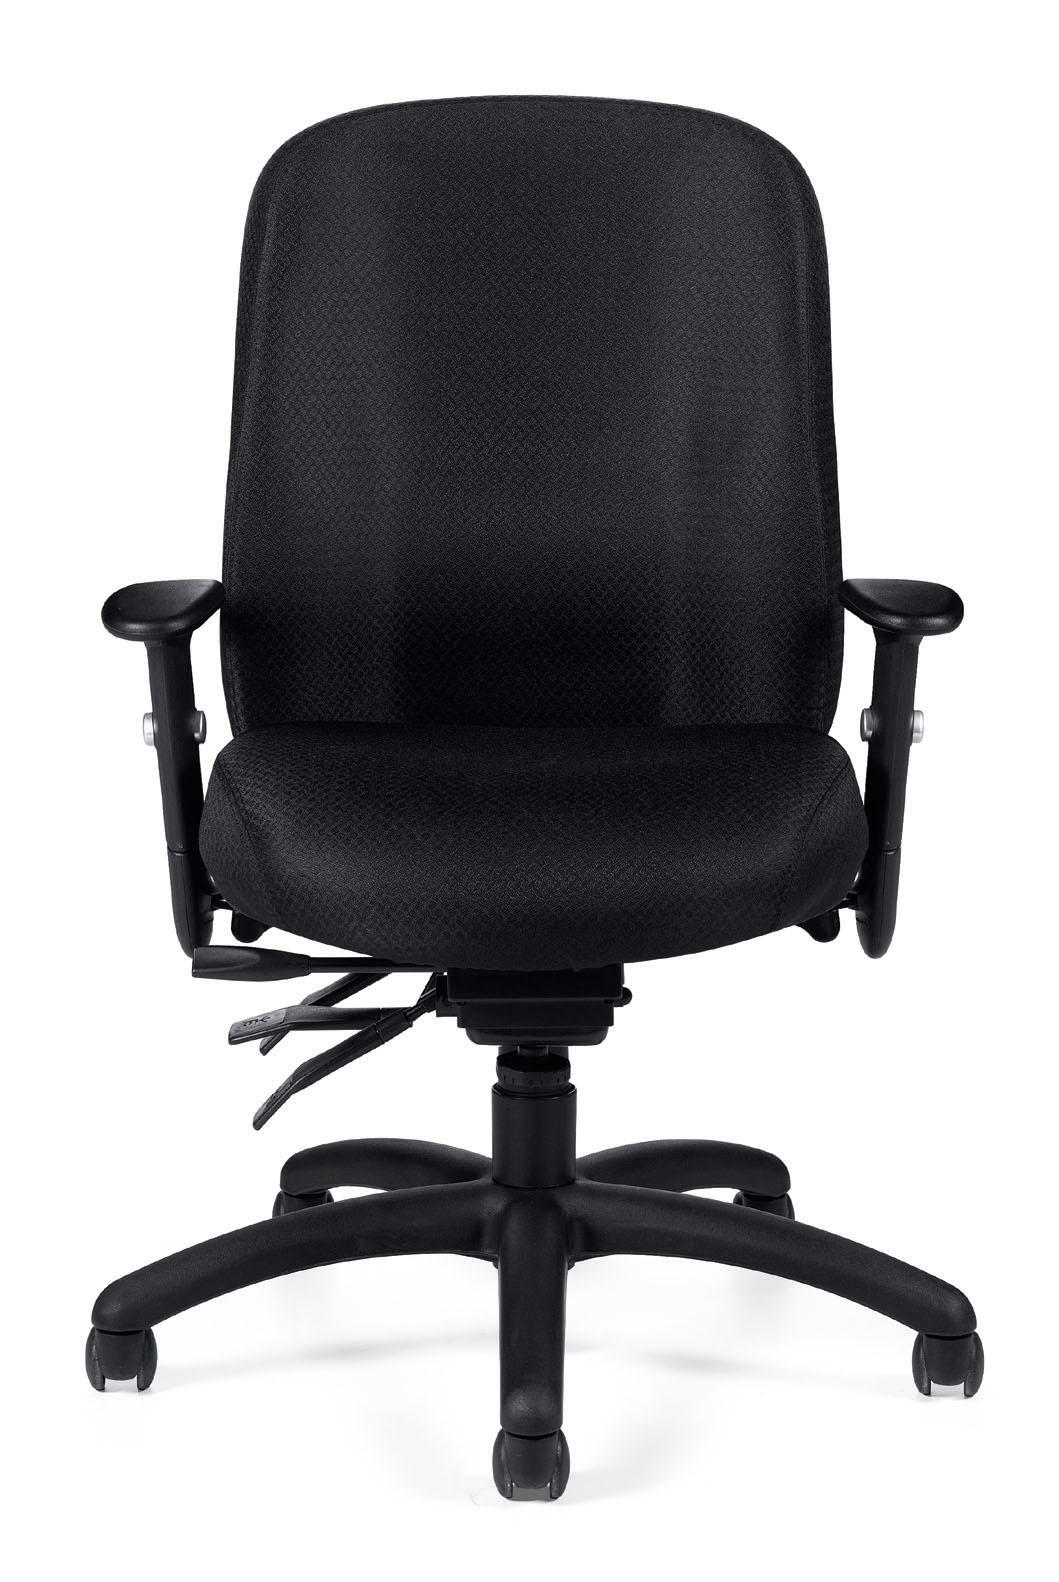 Offices To Go Task Chair OTG11710